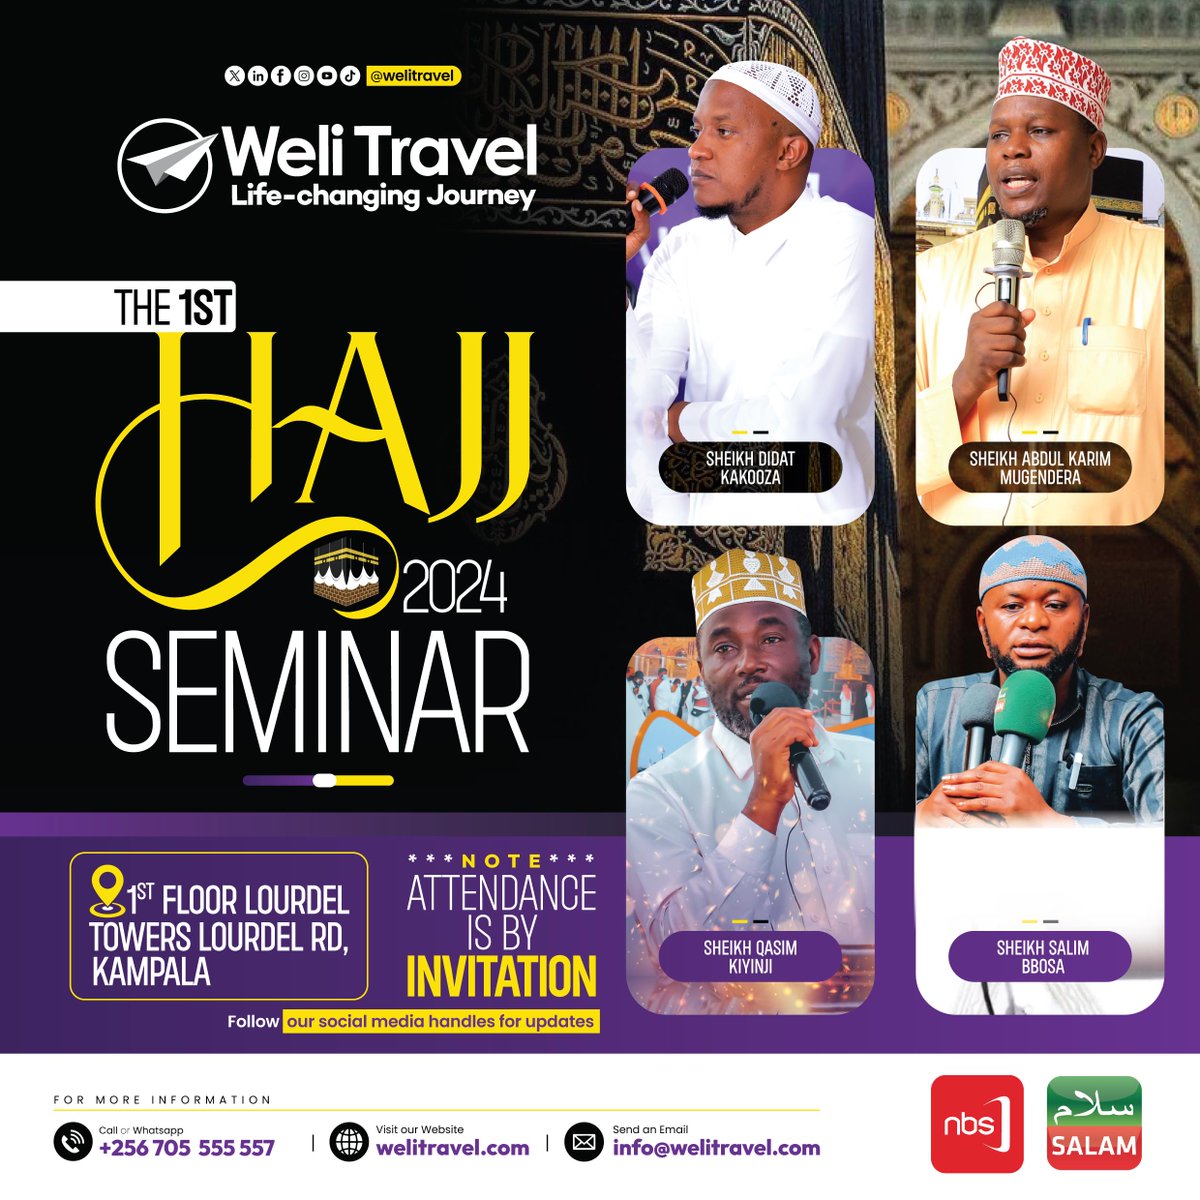 Countdown Begins as Weli Travel prepares for its 1st Hajj Seminar on the 18th of May, 2024.

Follow all the proceedings online. 

#HajjwithWeli | #welitravel | #lifechangingjourney #SalamUpdates